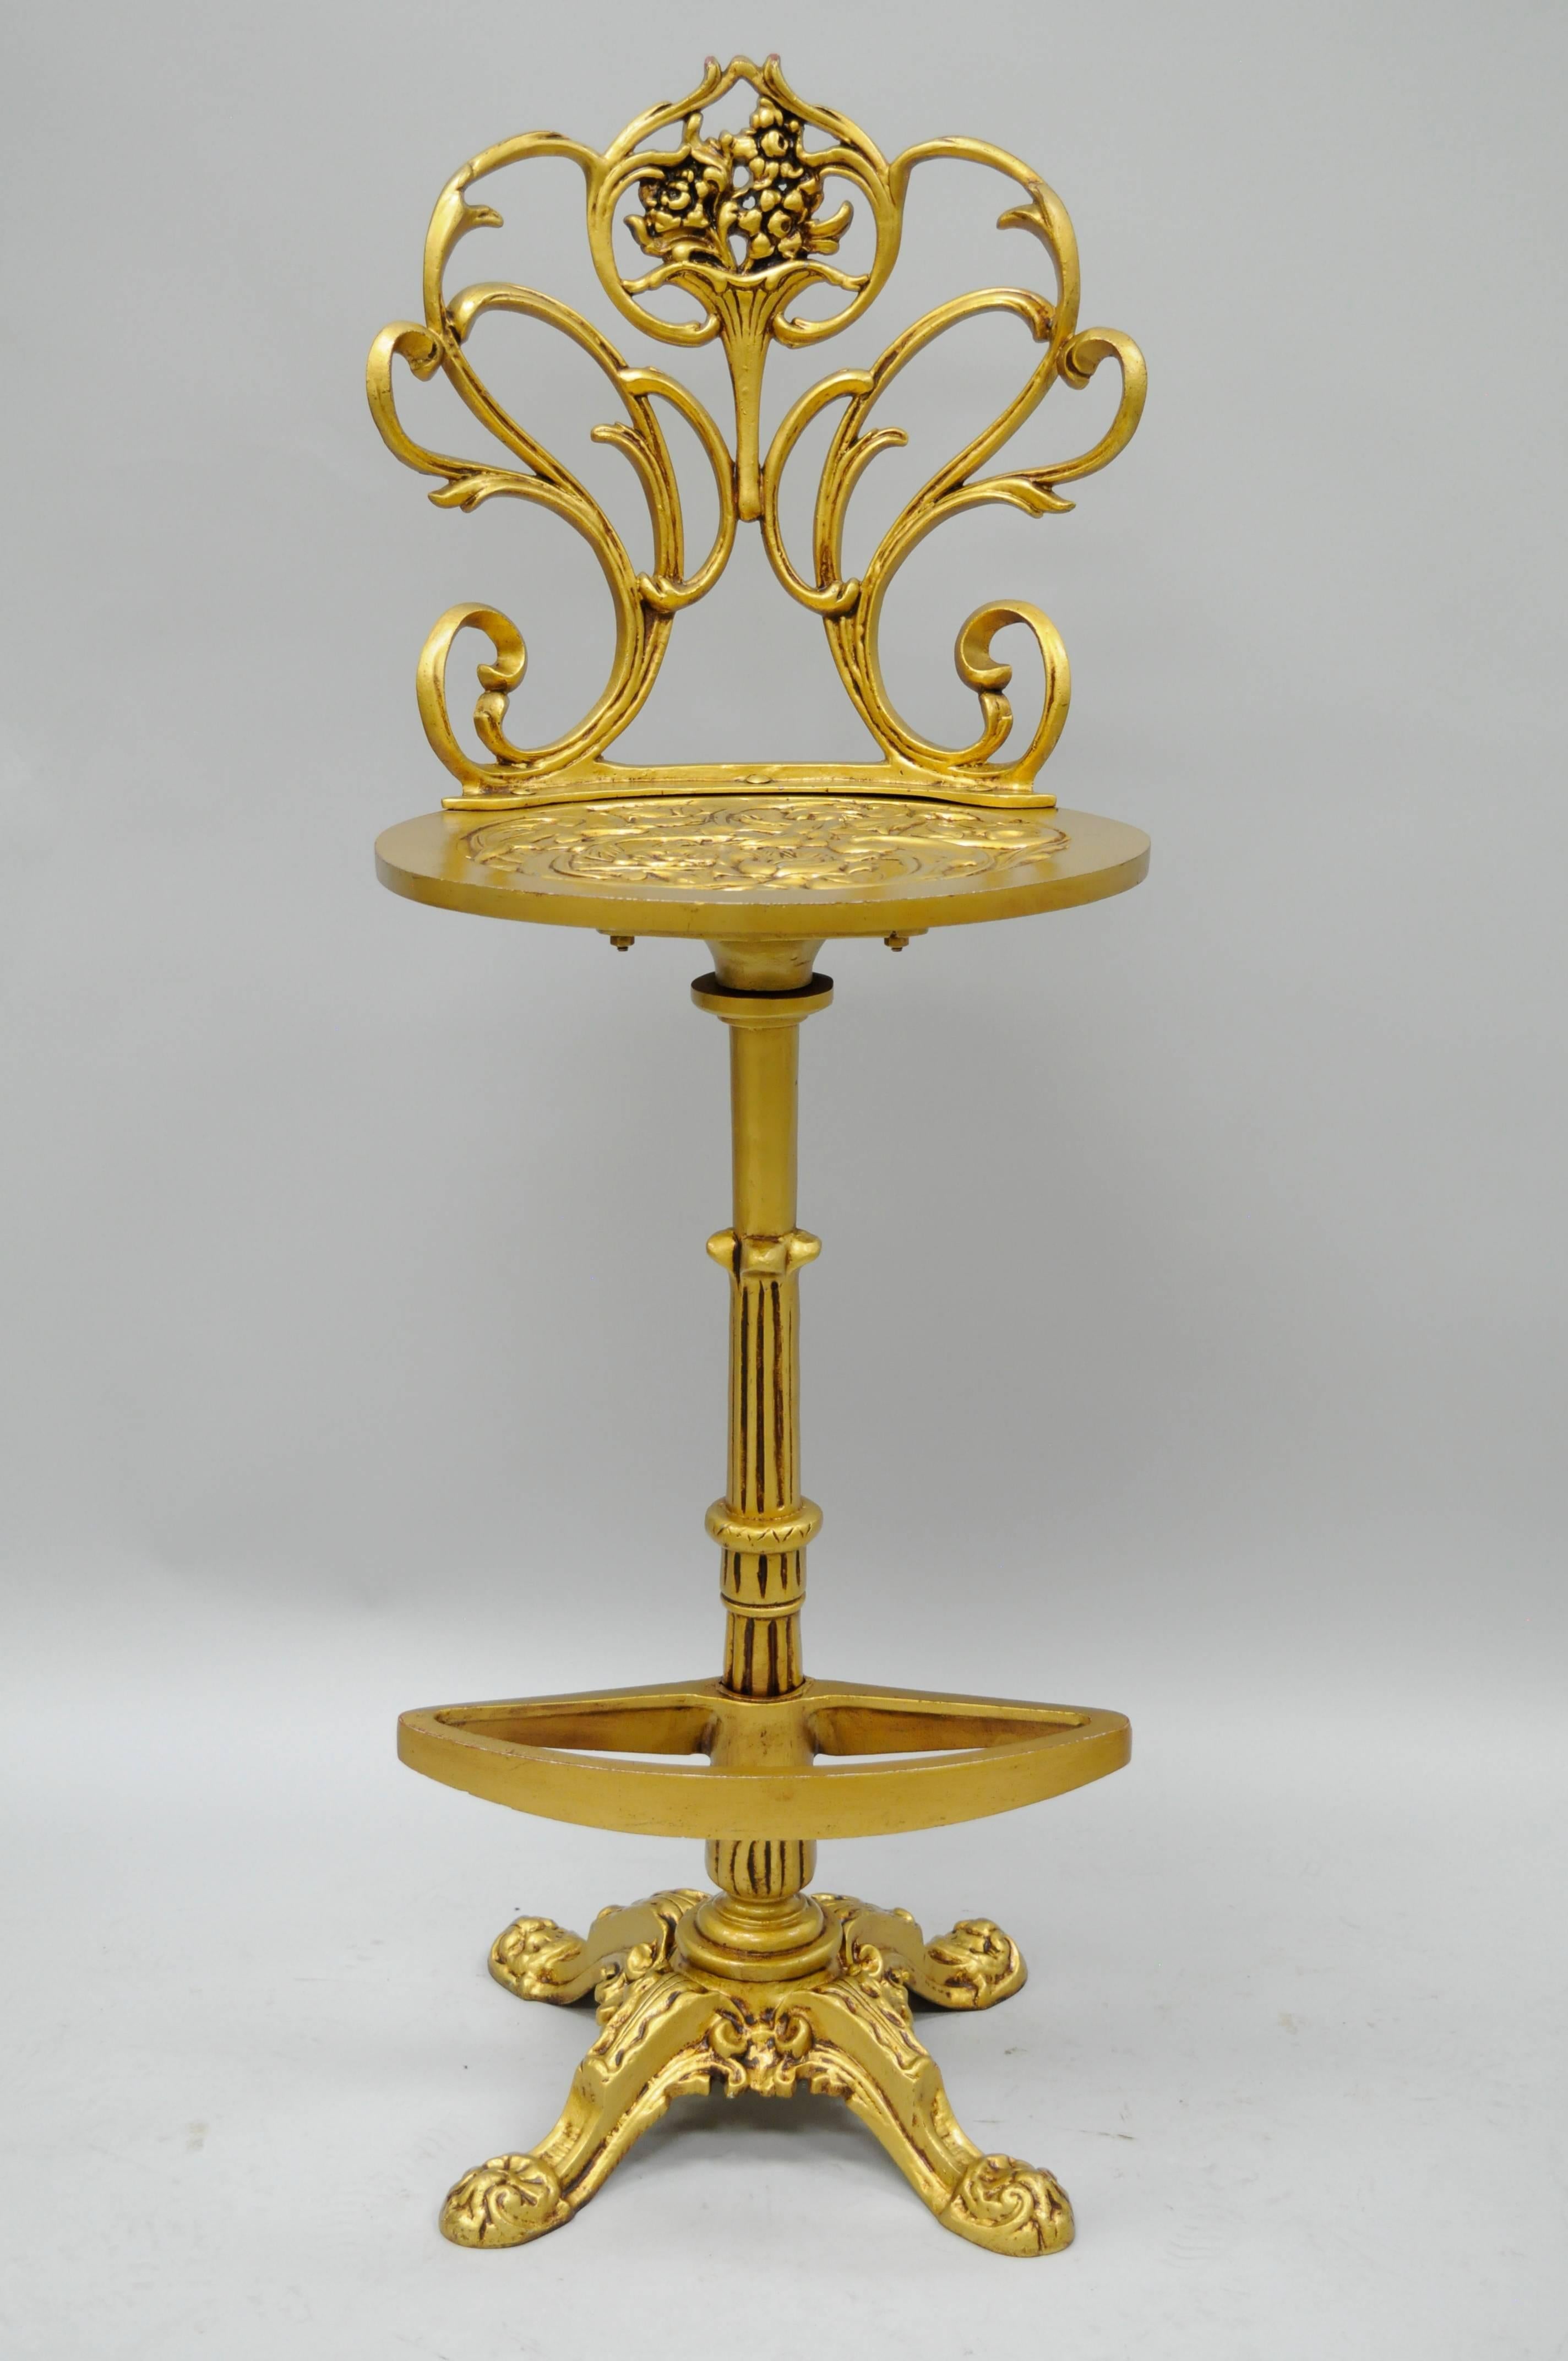 Remarkable set of four vintage swivel and return gold Hollywood Regency / Art Nouveau style cast aluminum bar stools attributed to Arthur Court. The set features swivel and return seats, finely cast floral and scrolling acanthus details to the